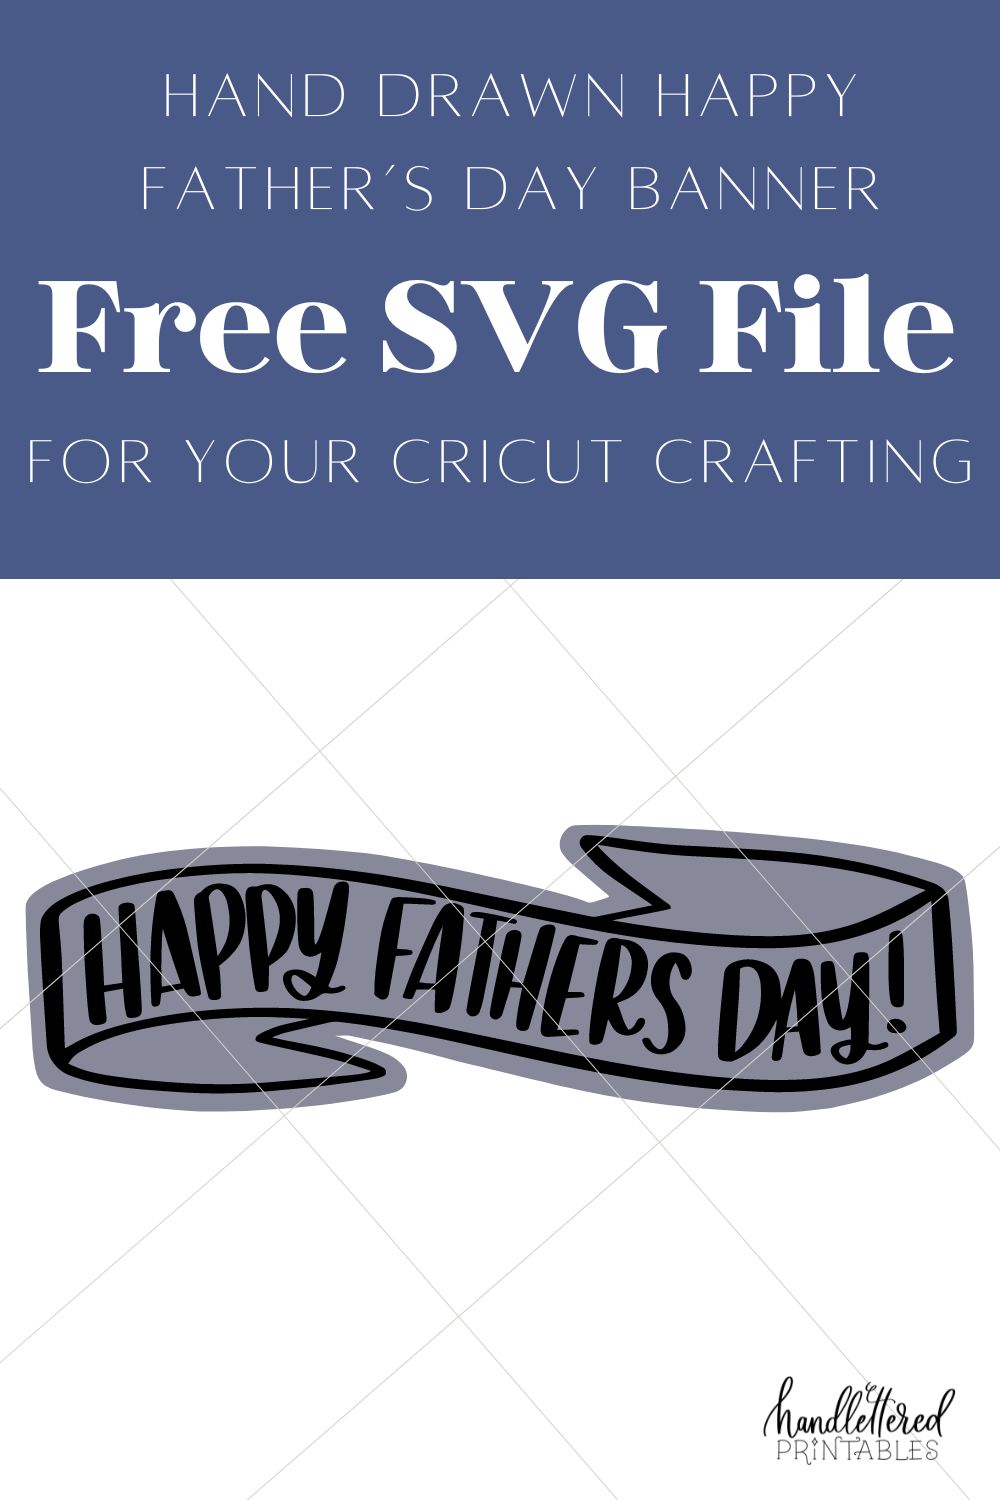 text over reads: hand drawn happy father's day banner free SVG file for your cricut crafting image is of the svg design on a white background